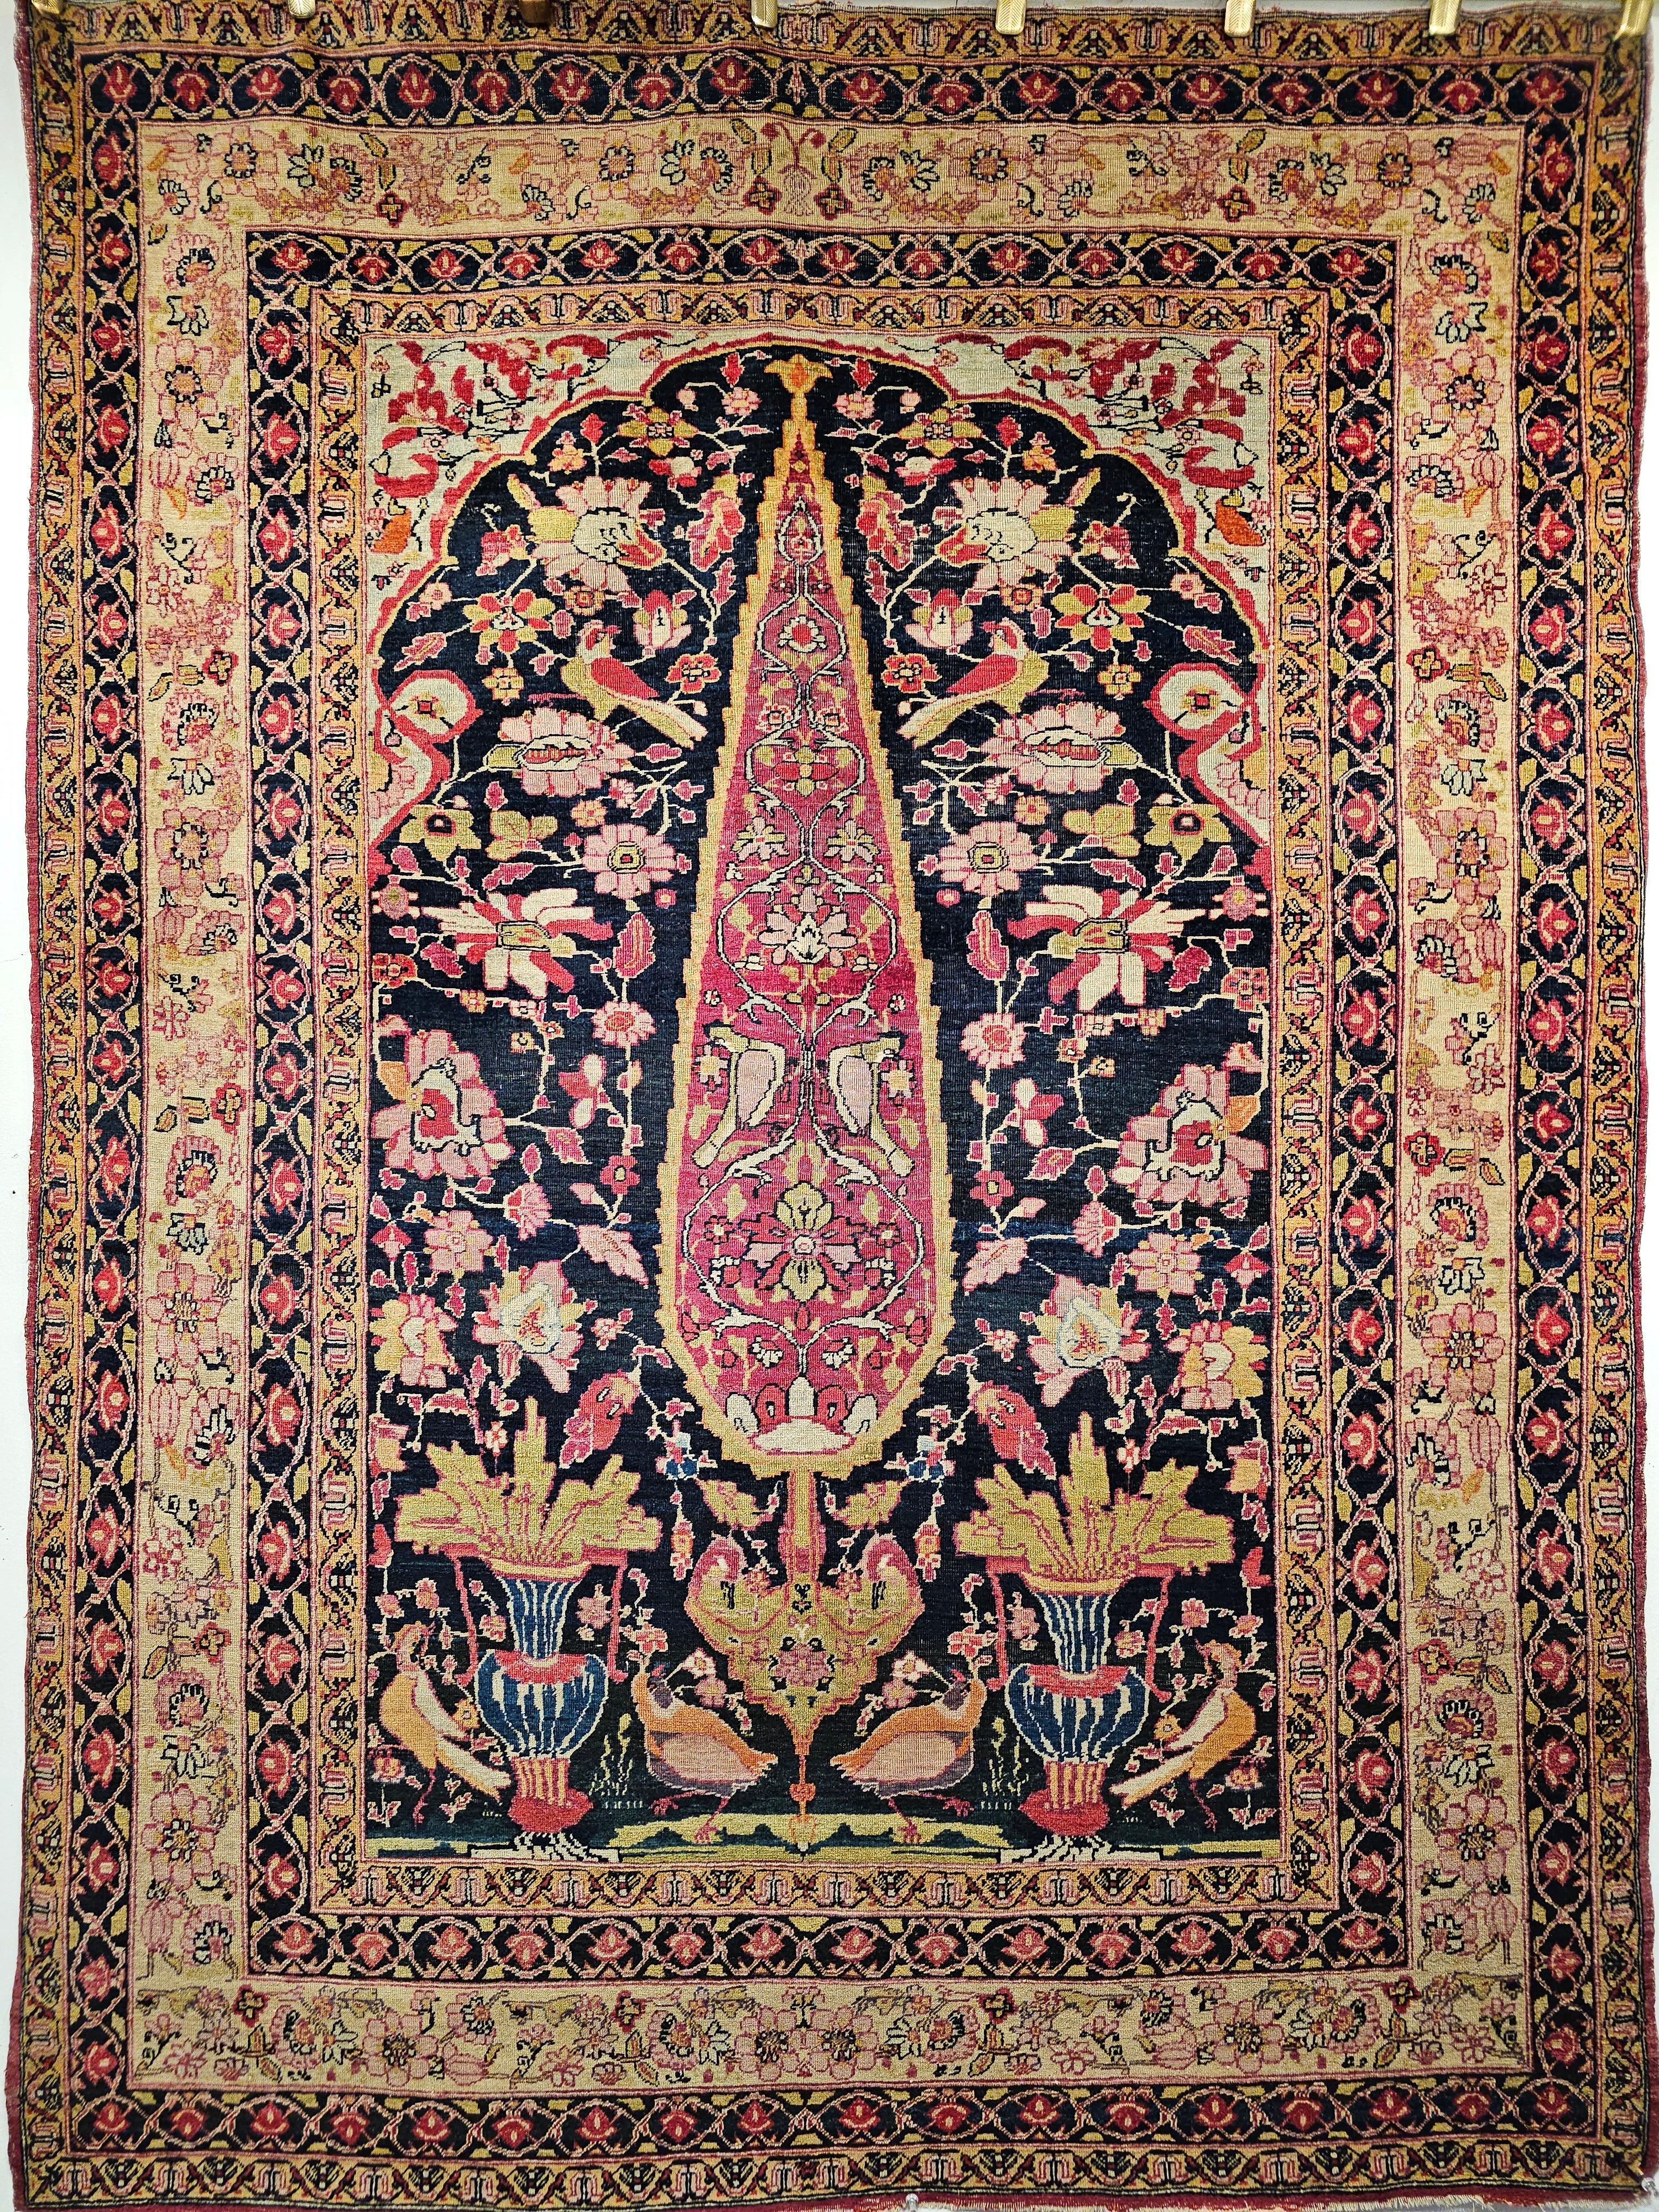 A beautiful Persian Kerman Lavar area rug with the “Tree of Life” design from the 4th quarter of the 1800s. The main field is midnight blue with a central cypress tree with a beautiful magenta color flanked by birds and flowering vases beneath a